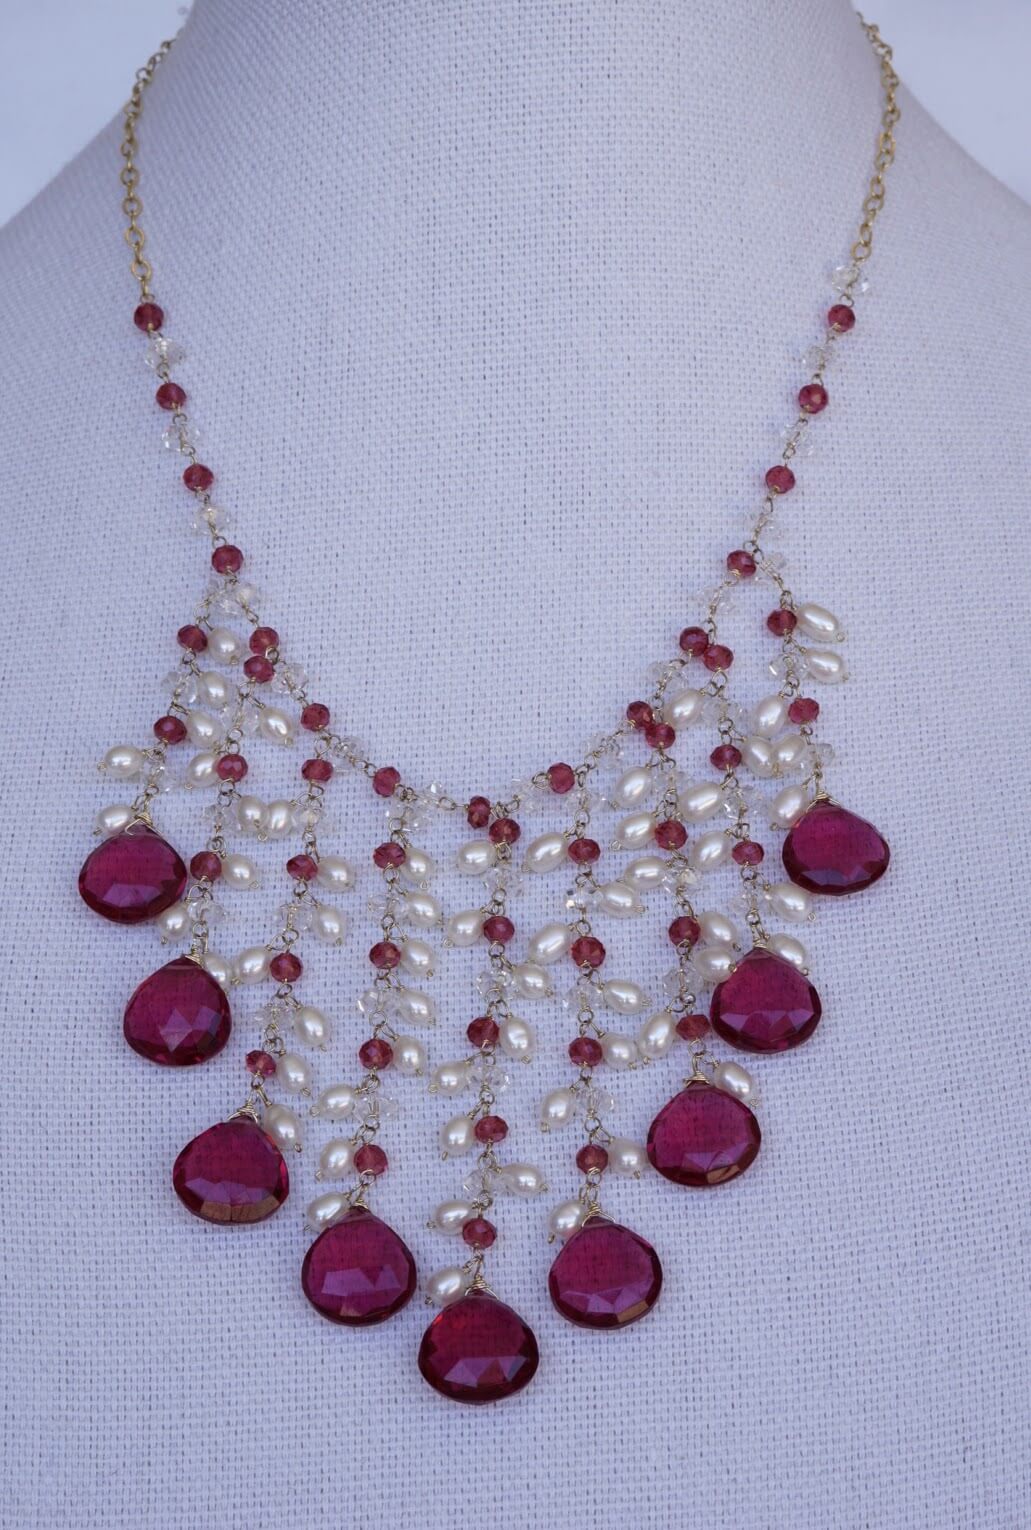 Rubelite, ruby and herkimer diamond necklace on display